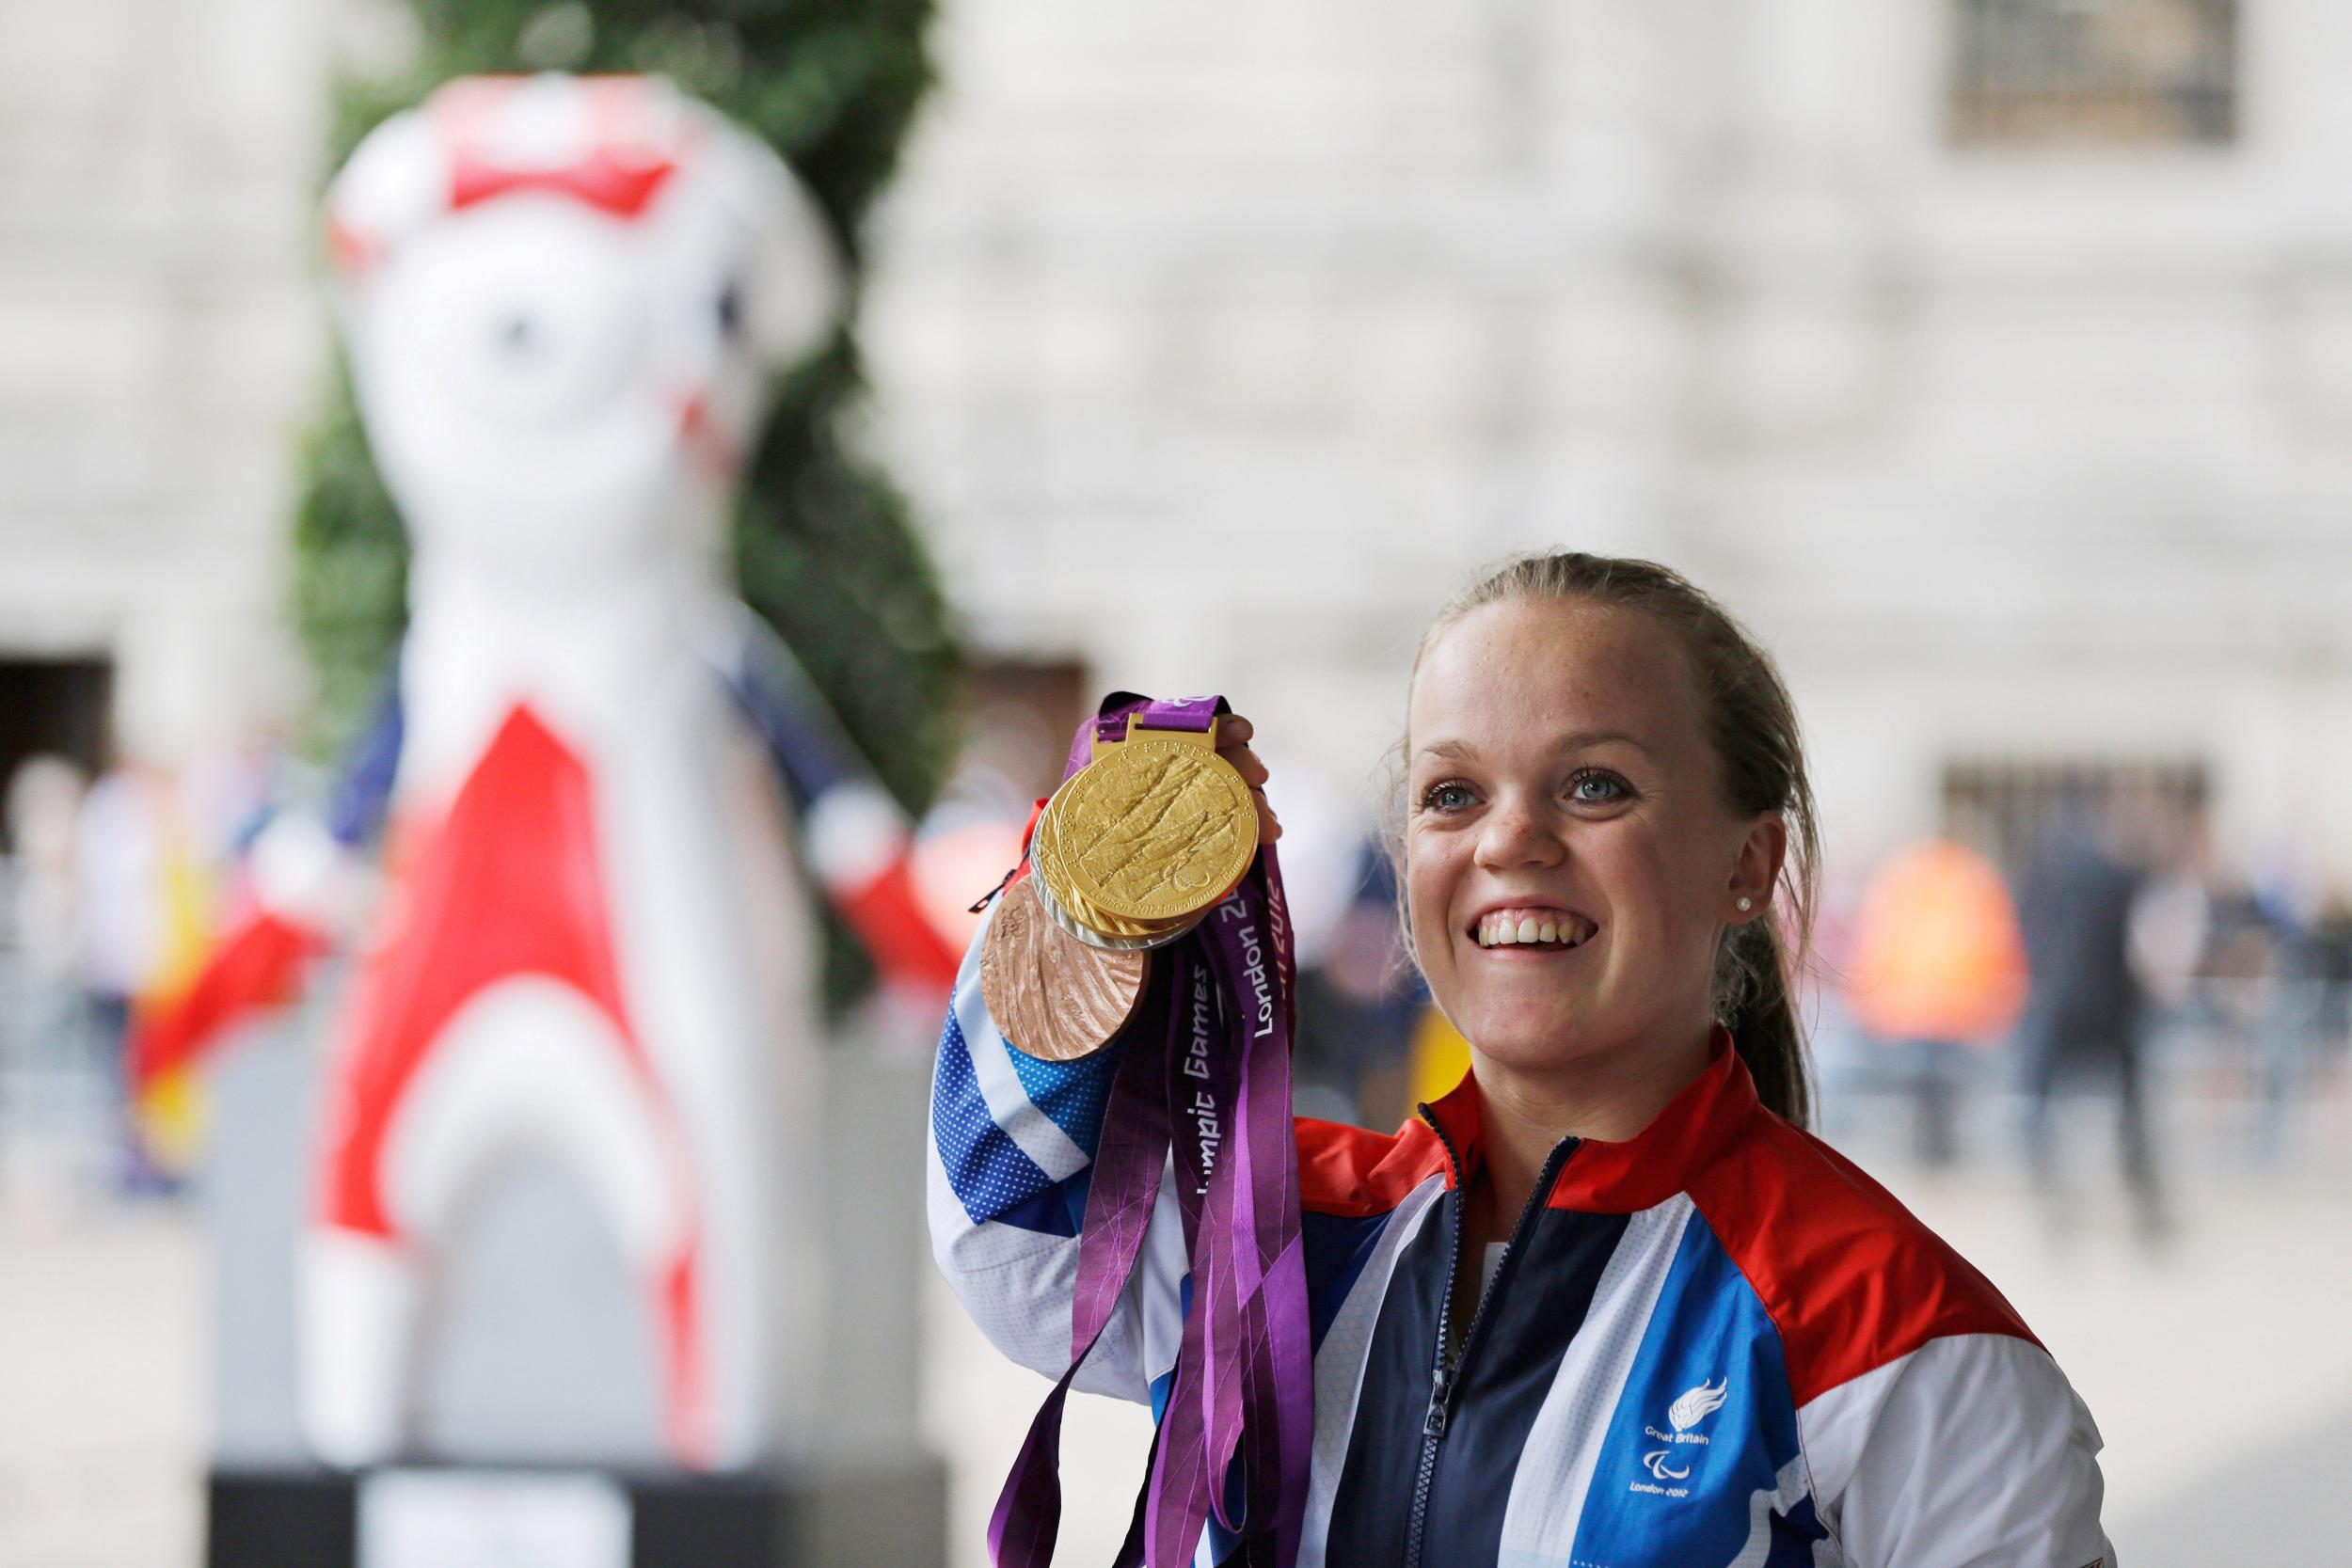 The Briton with her medal haul from the 2012 Paralympic Games